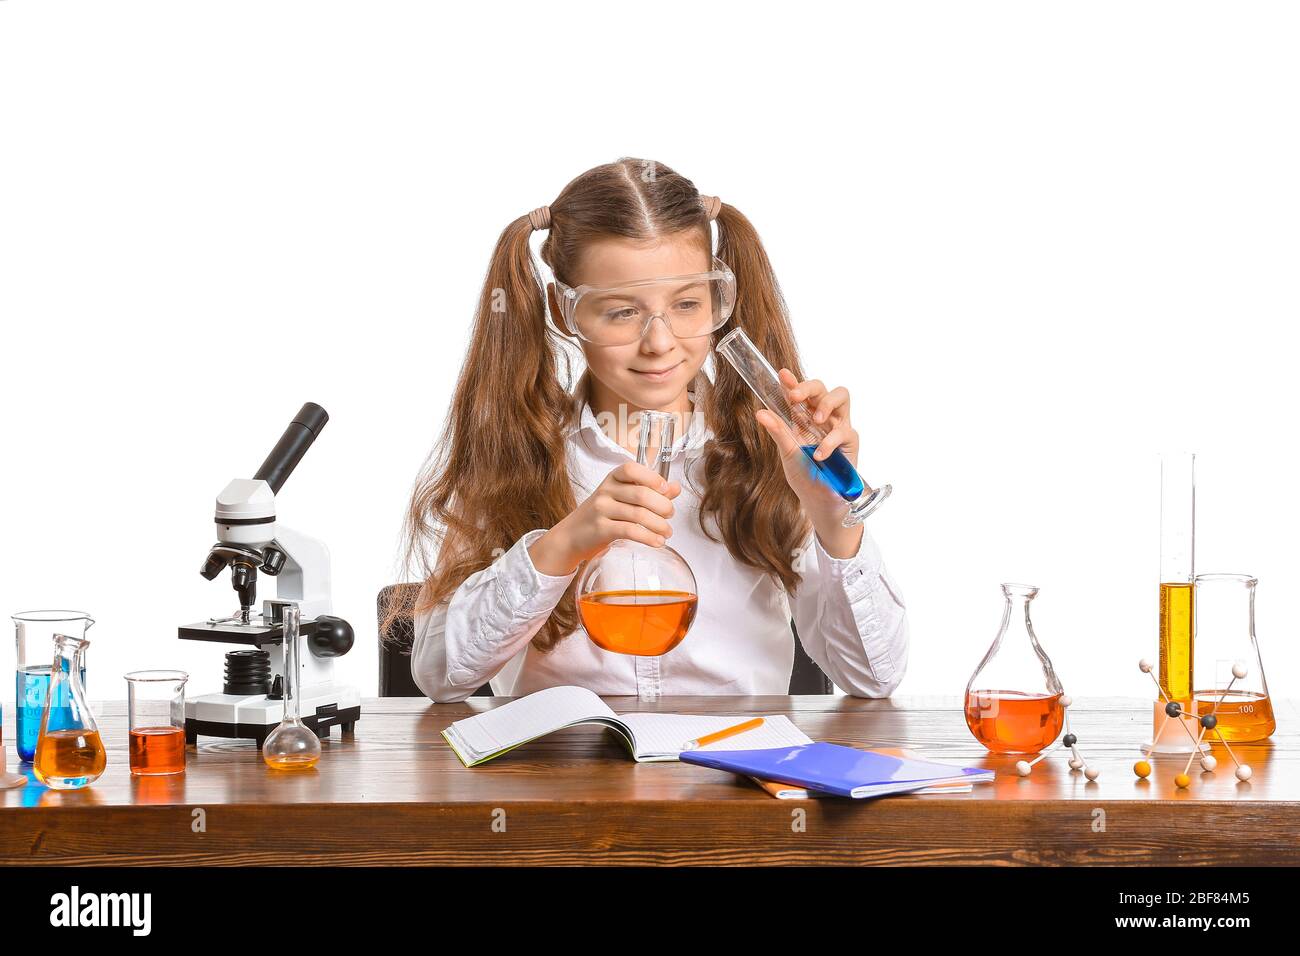 Cute little girl studying chemistry at table against white background Stock  Photo - Alamy